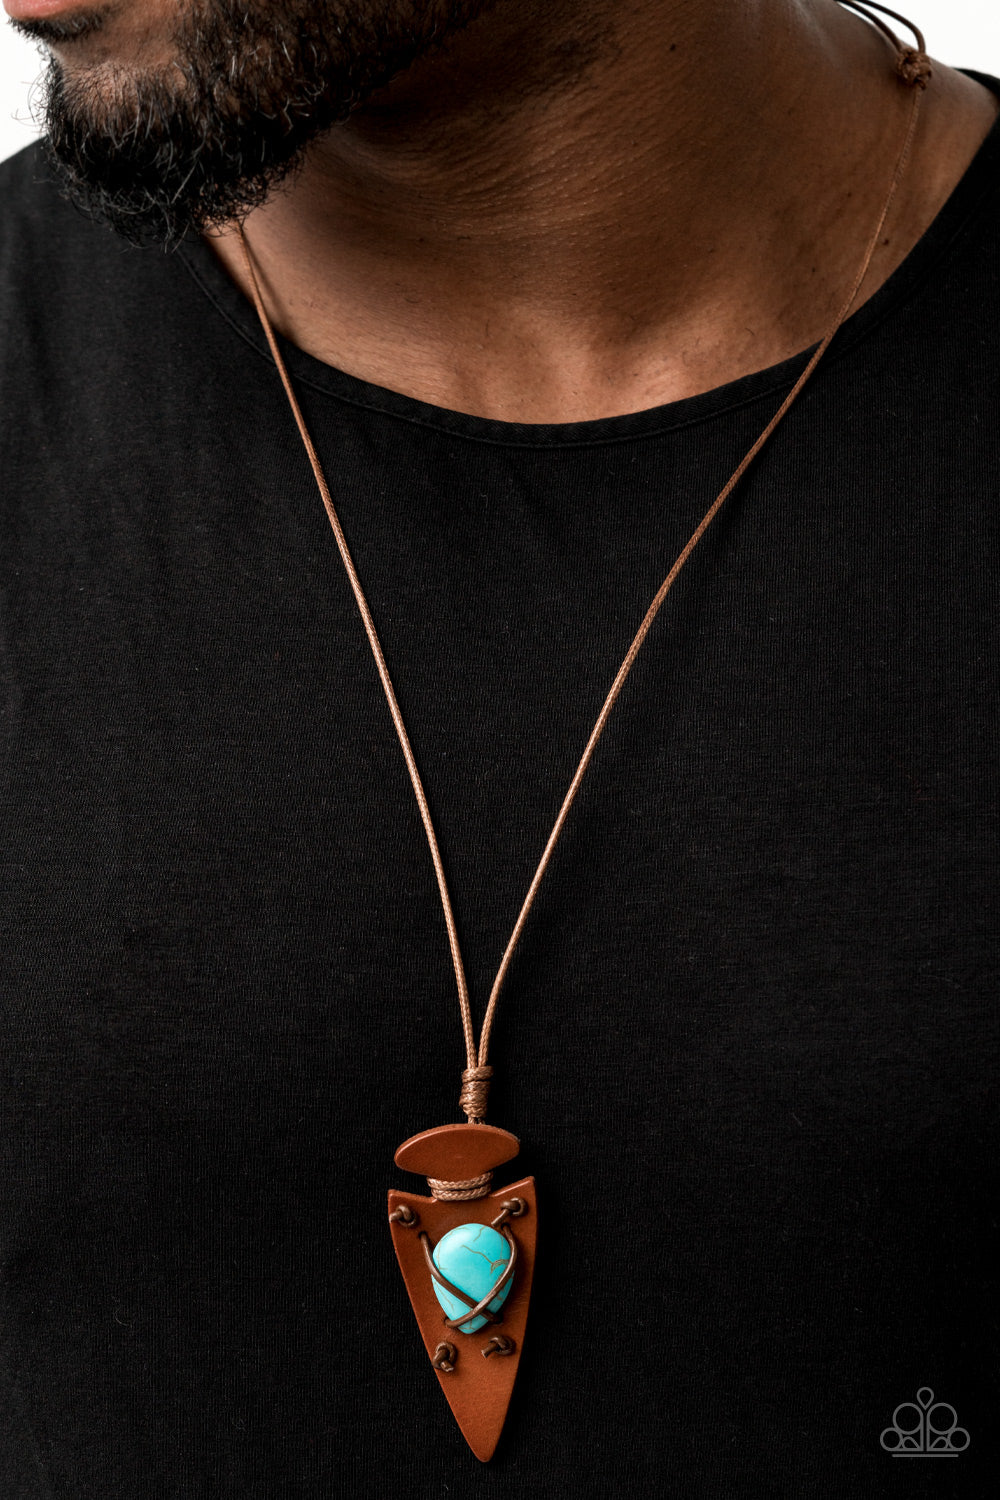 HOLD YOUR ARROWHEAD UP HIGH - BLUE TURQUOISE AND LEATHER NECKLACE